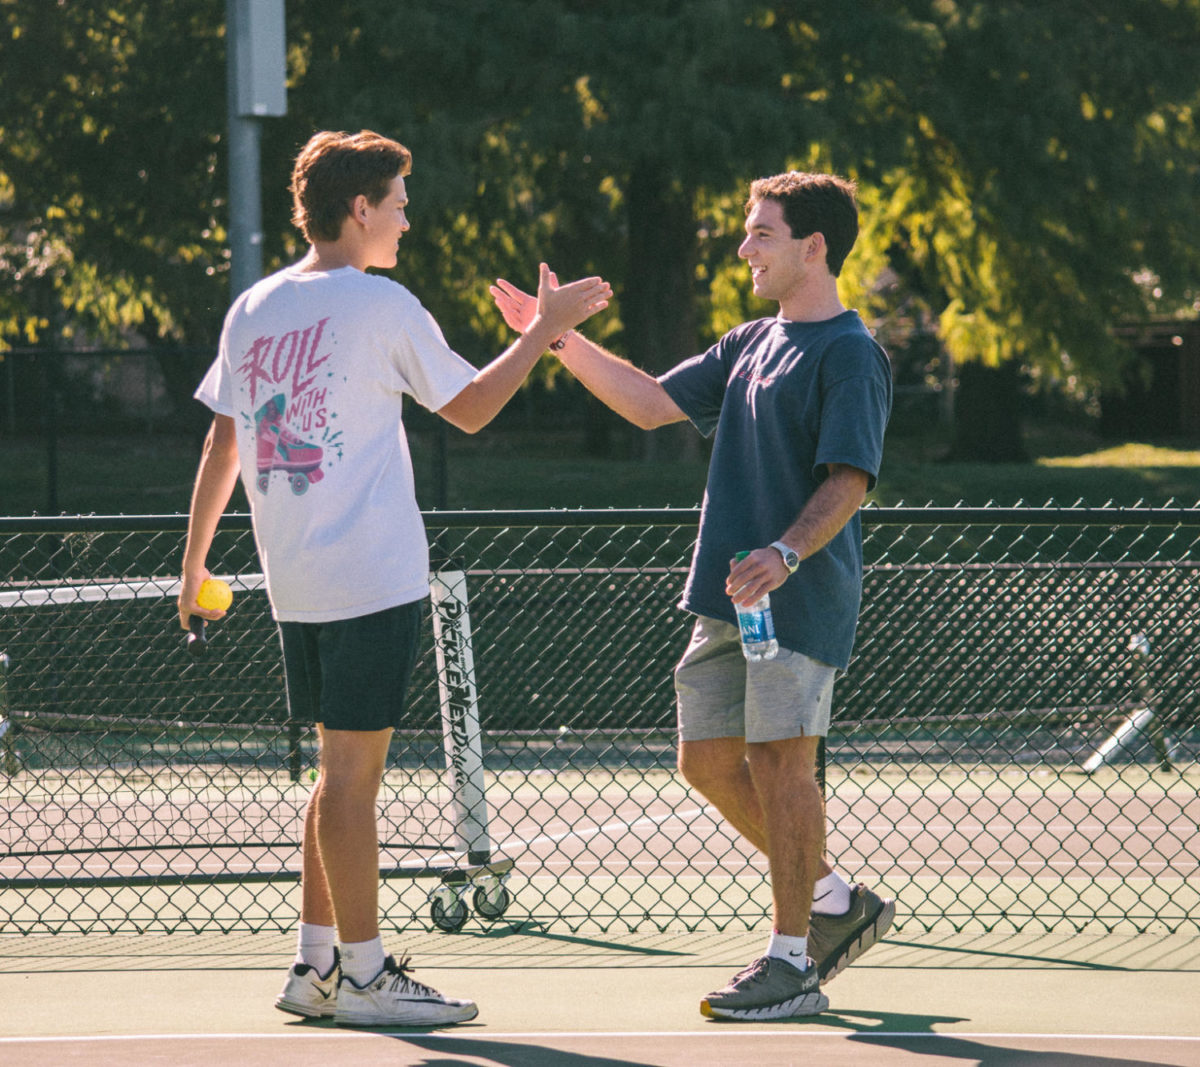 Two+TCU+students+high-fiving+while+playing+pickleball+during+club+hours+at+the+TCU+Tennis+Courts.+%28Photo+courtesy+of%3A+Kate+Woolsen%29